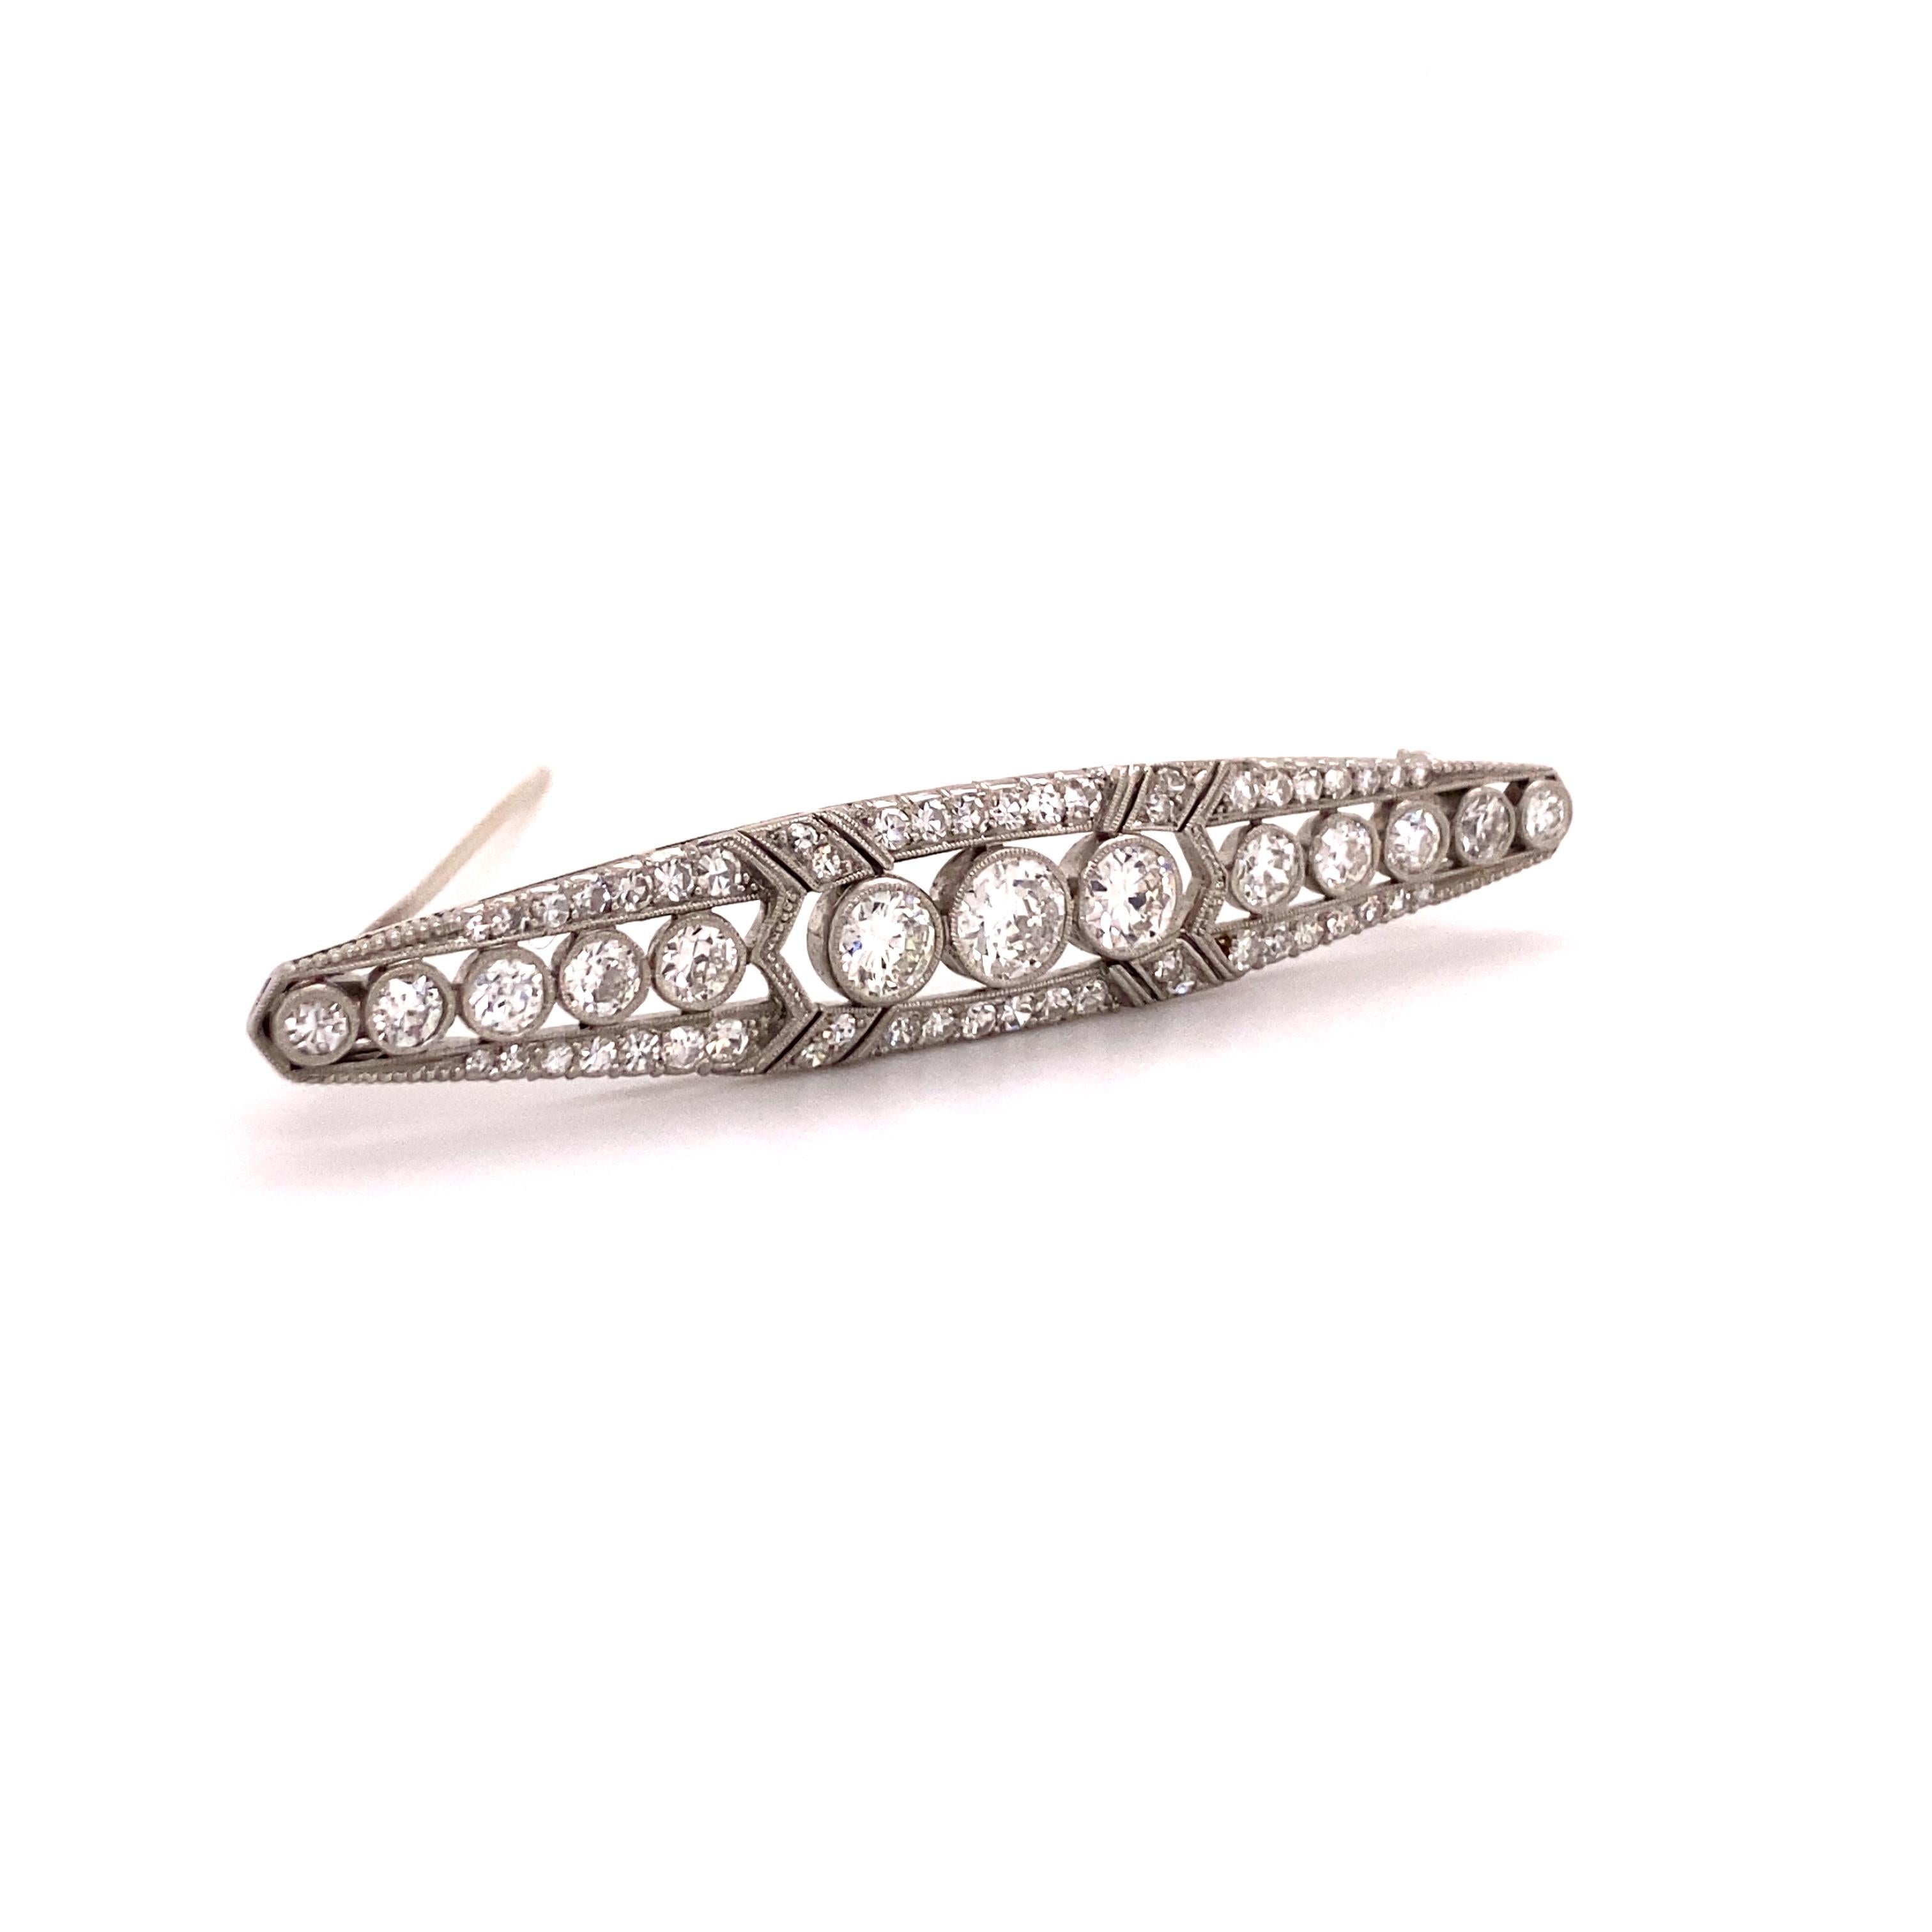 This beautifully handcrafted brooch in platinum 950 features 3 Old European cut diamonds of G/H colour and si1 clarity, total weight approximately 1.62 carats. They are framed by 10 Old European cut diamonds (slightly graduated towards the tips of